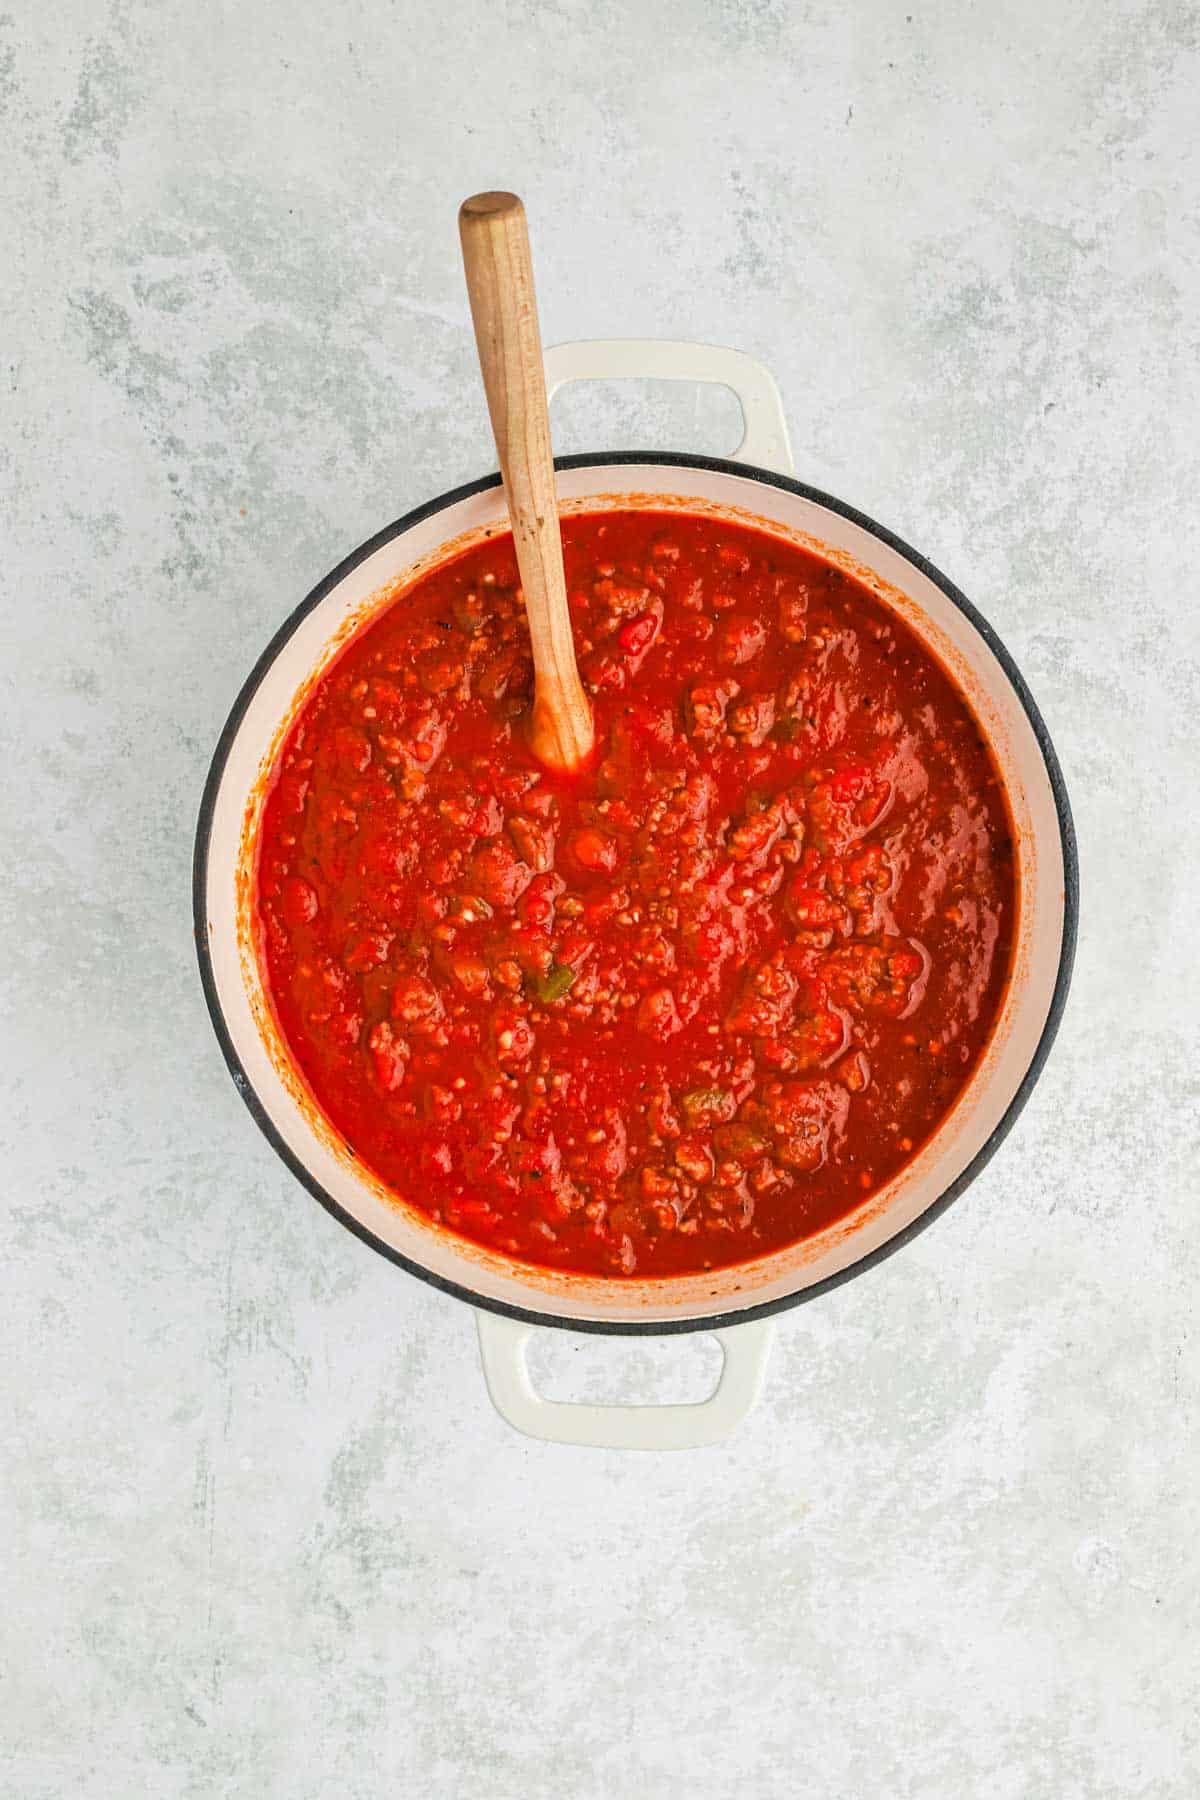 Homemade spaghetti sauce in a pot with a wooden spoon.